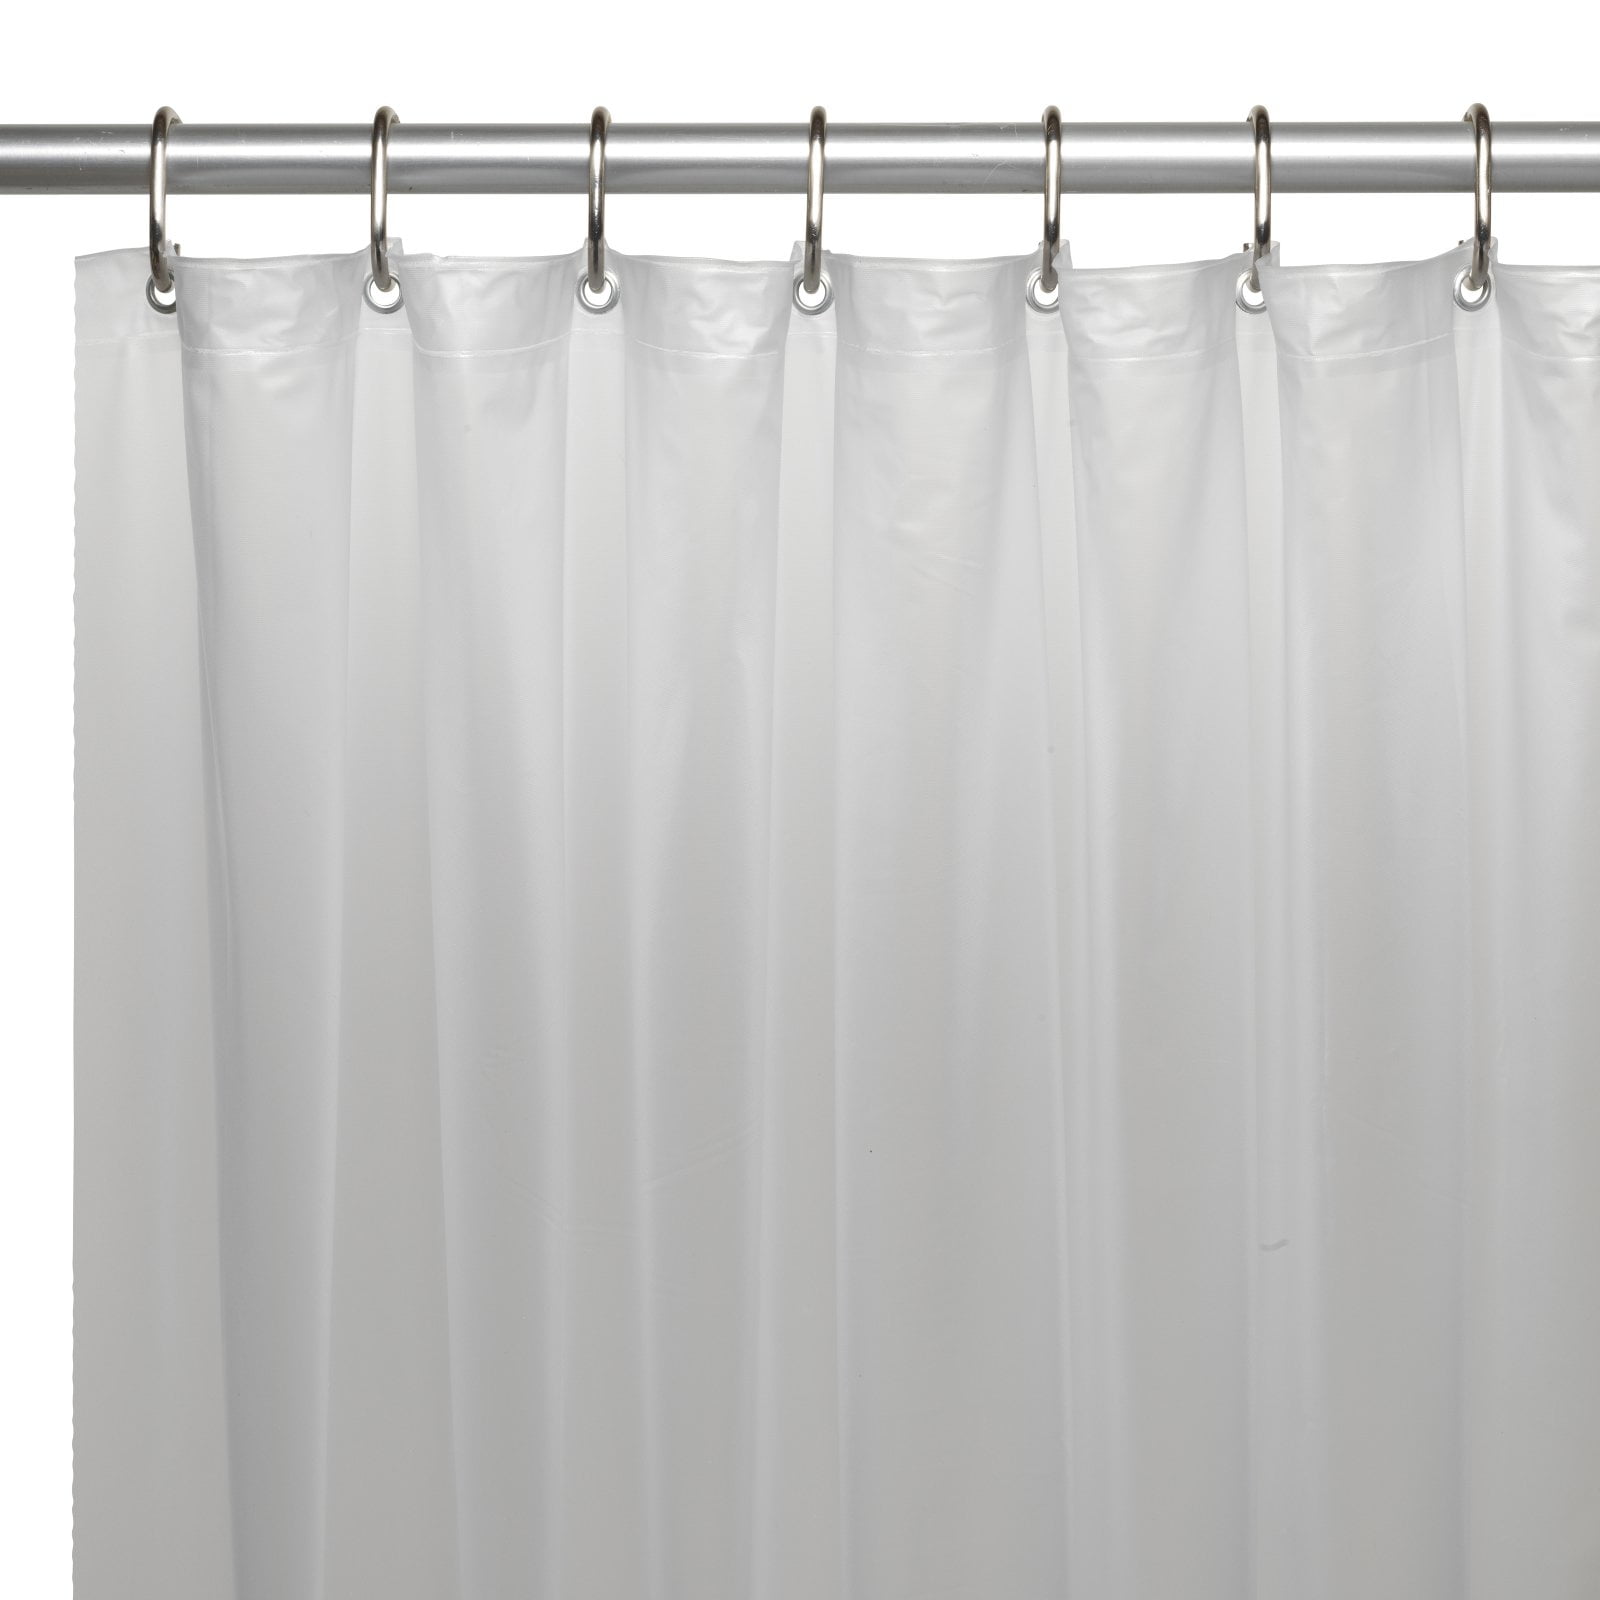 72 X 72 Brown Carnation Home Fashions 3-Gauge Vinyl Shower Curtain Liner with Metal Grommets 